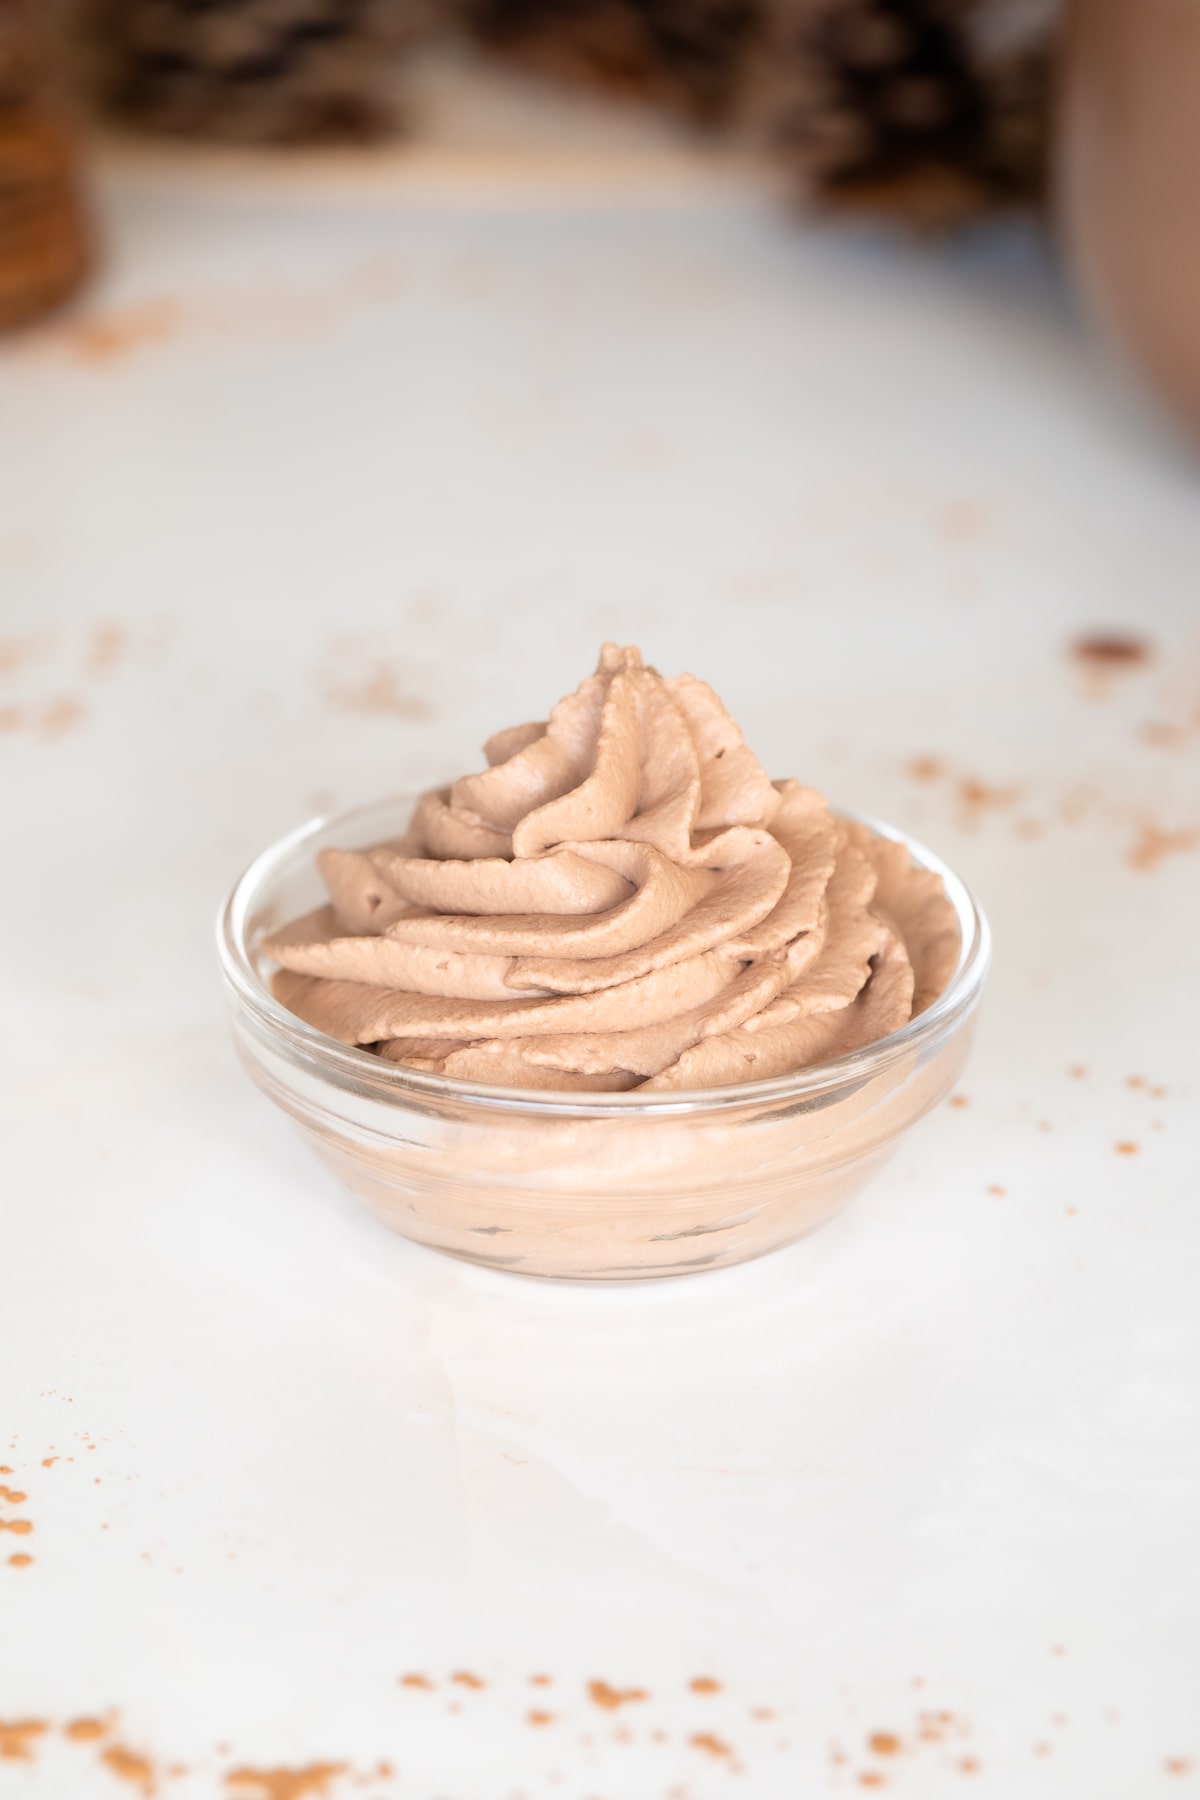 chocolate whipped cream in bowl.